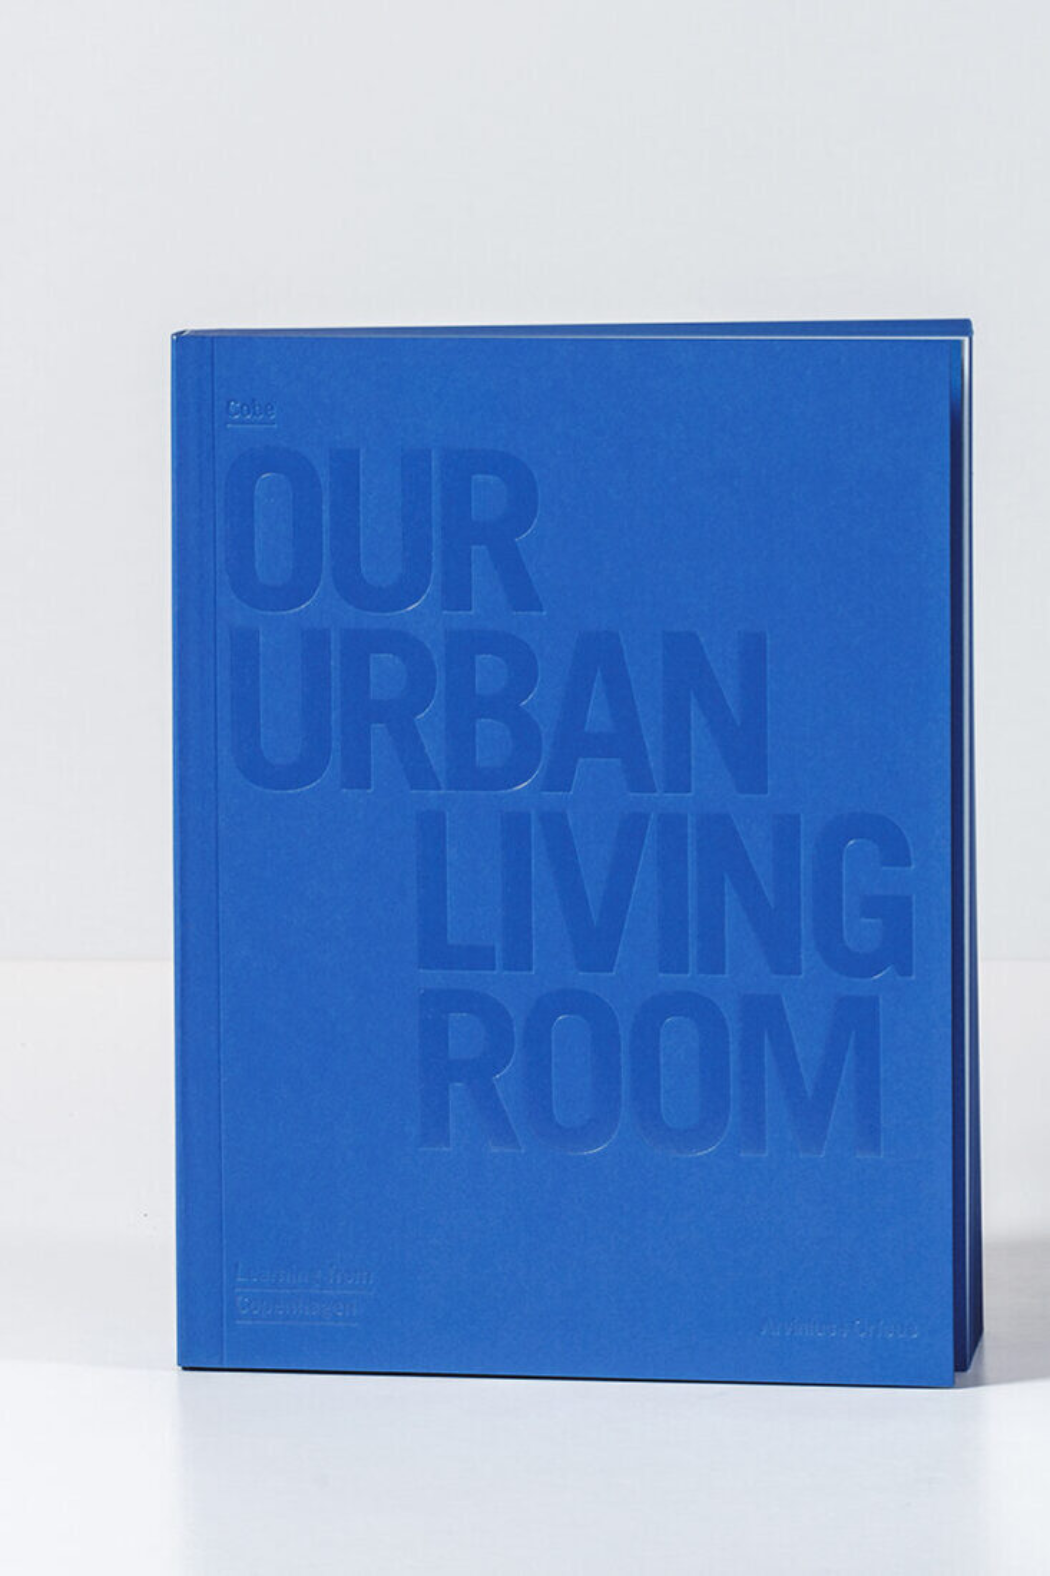 010 cobe objects our urban living room book d 2022 11 10 142044 lufy